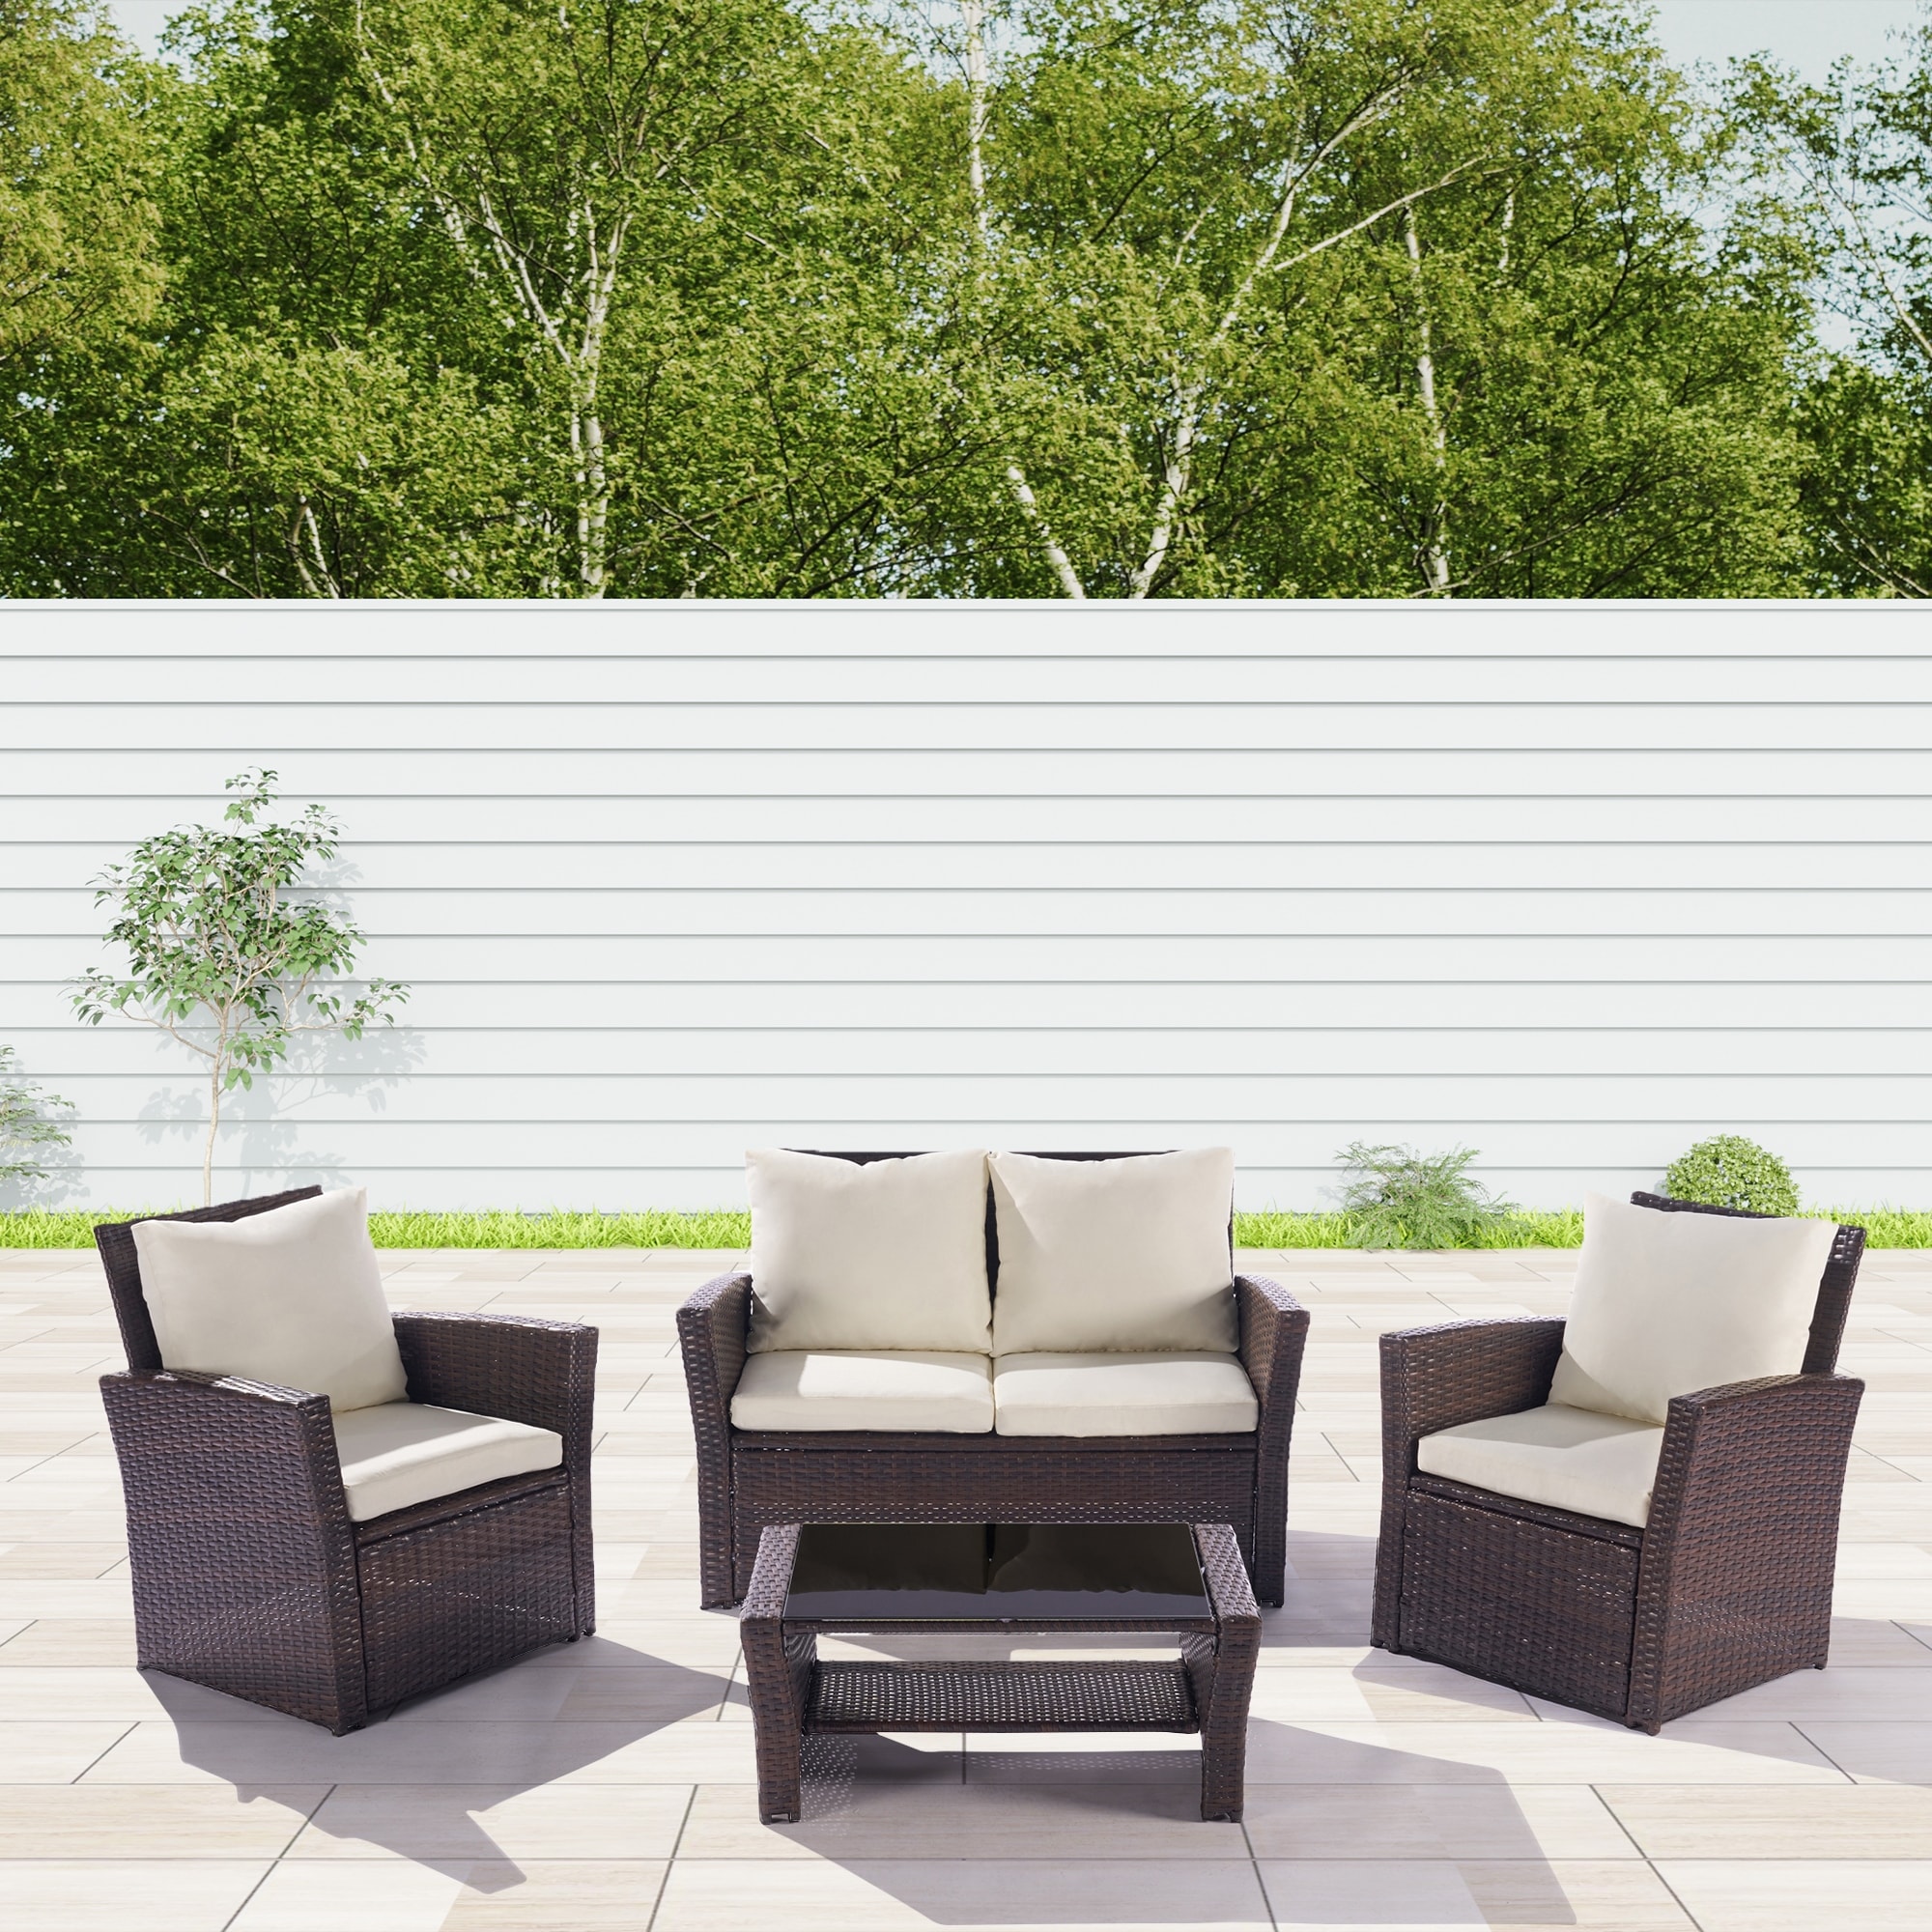 4-piece Pe Rattan Wicker Conversation Sofa Set For 4  Outdoor Garden Patio Furniture With Cushions For Any Outdoor Setting